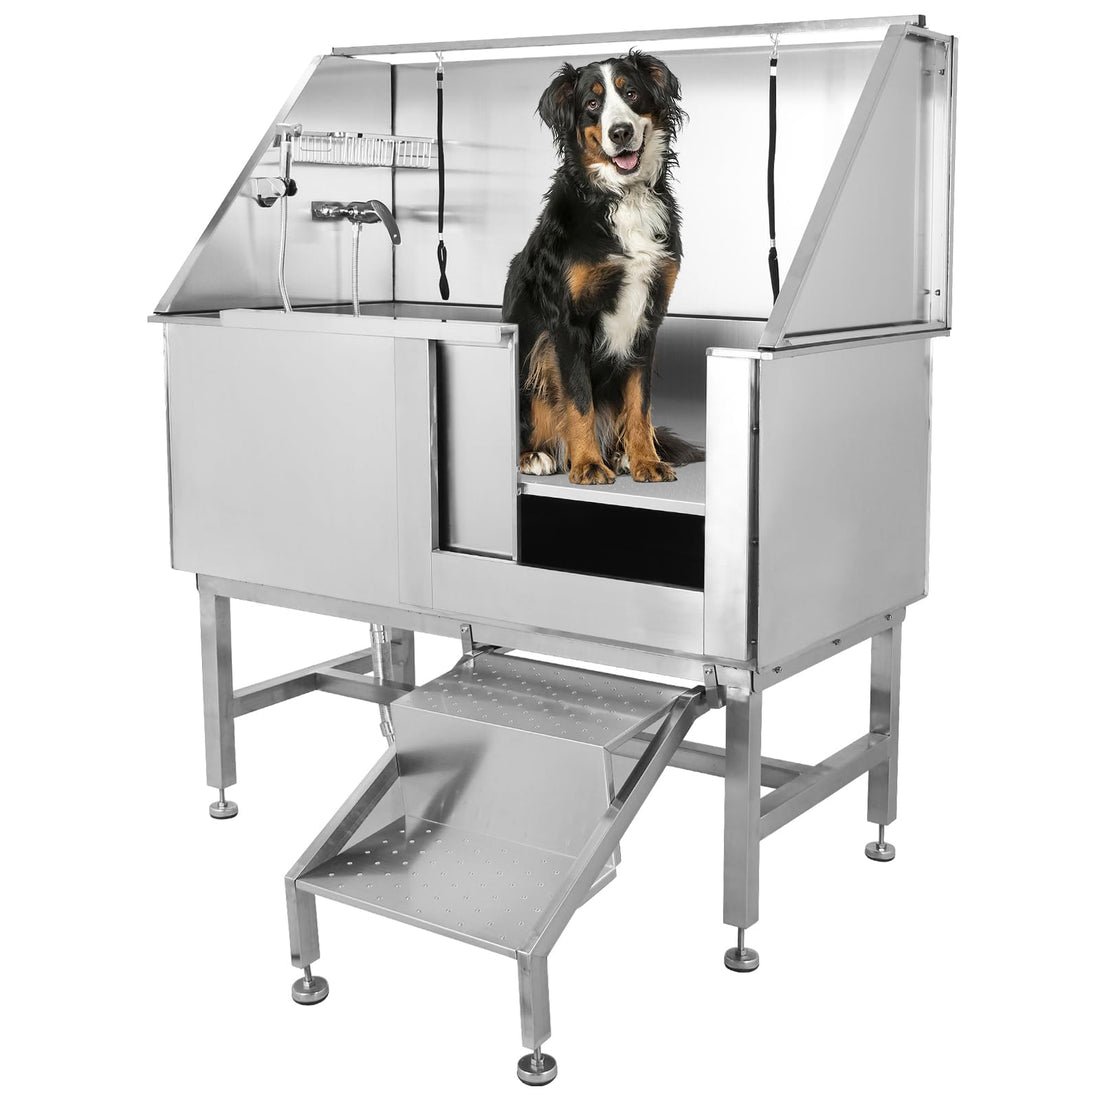 Dog Grooming Tub 50 Inch Pet Wash Station Professional Stainless Steel Pet Grooming Tub